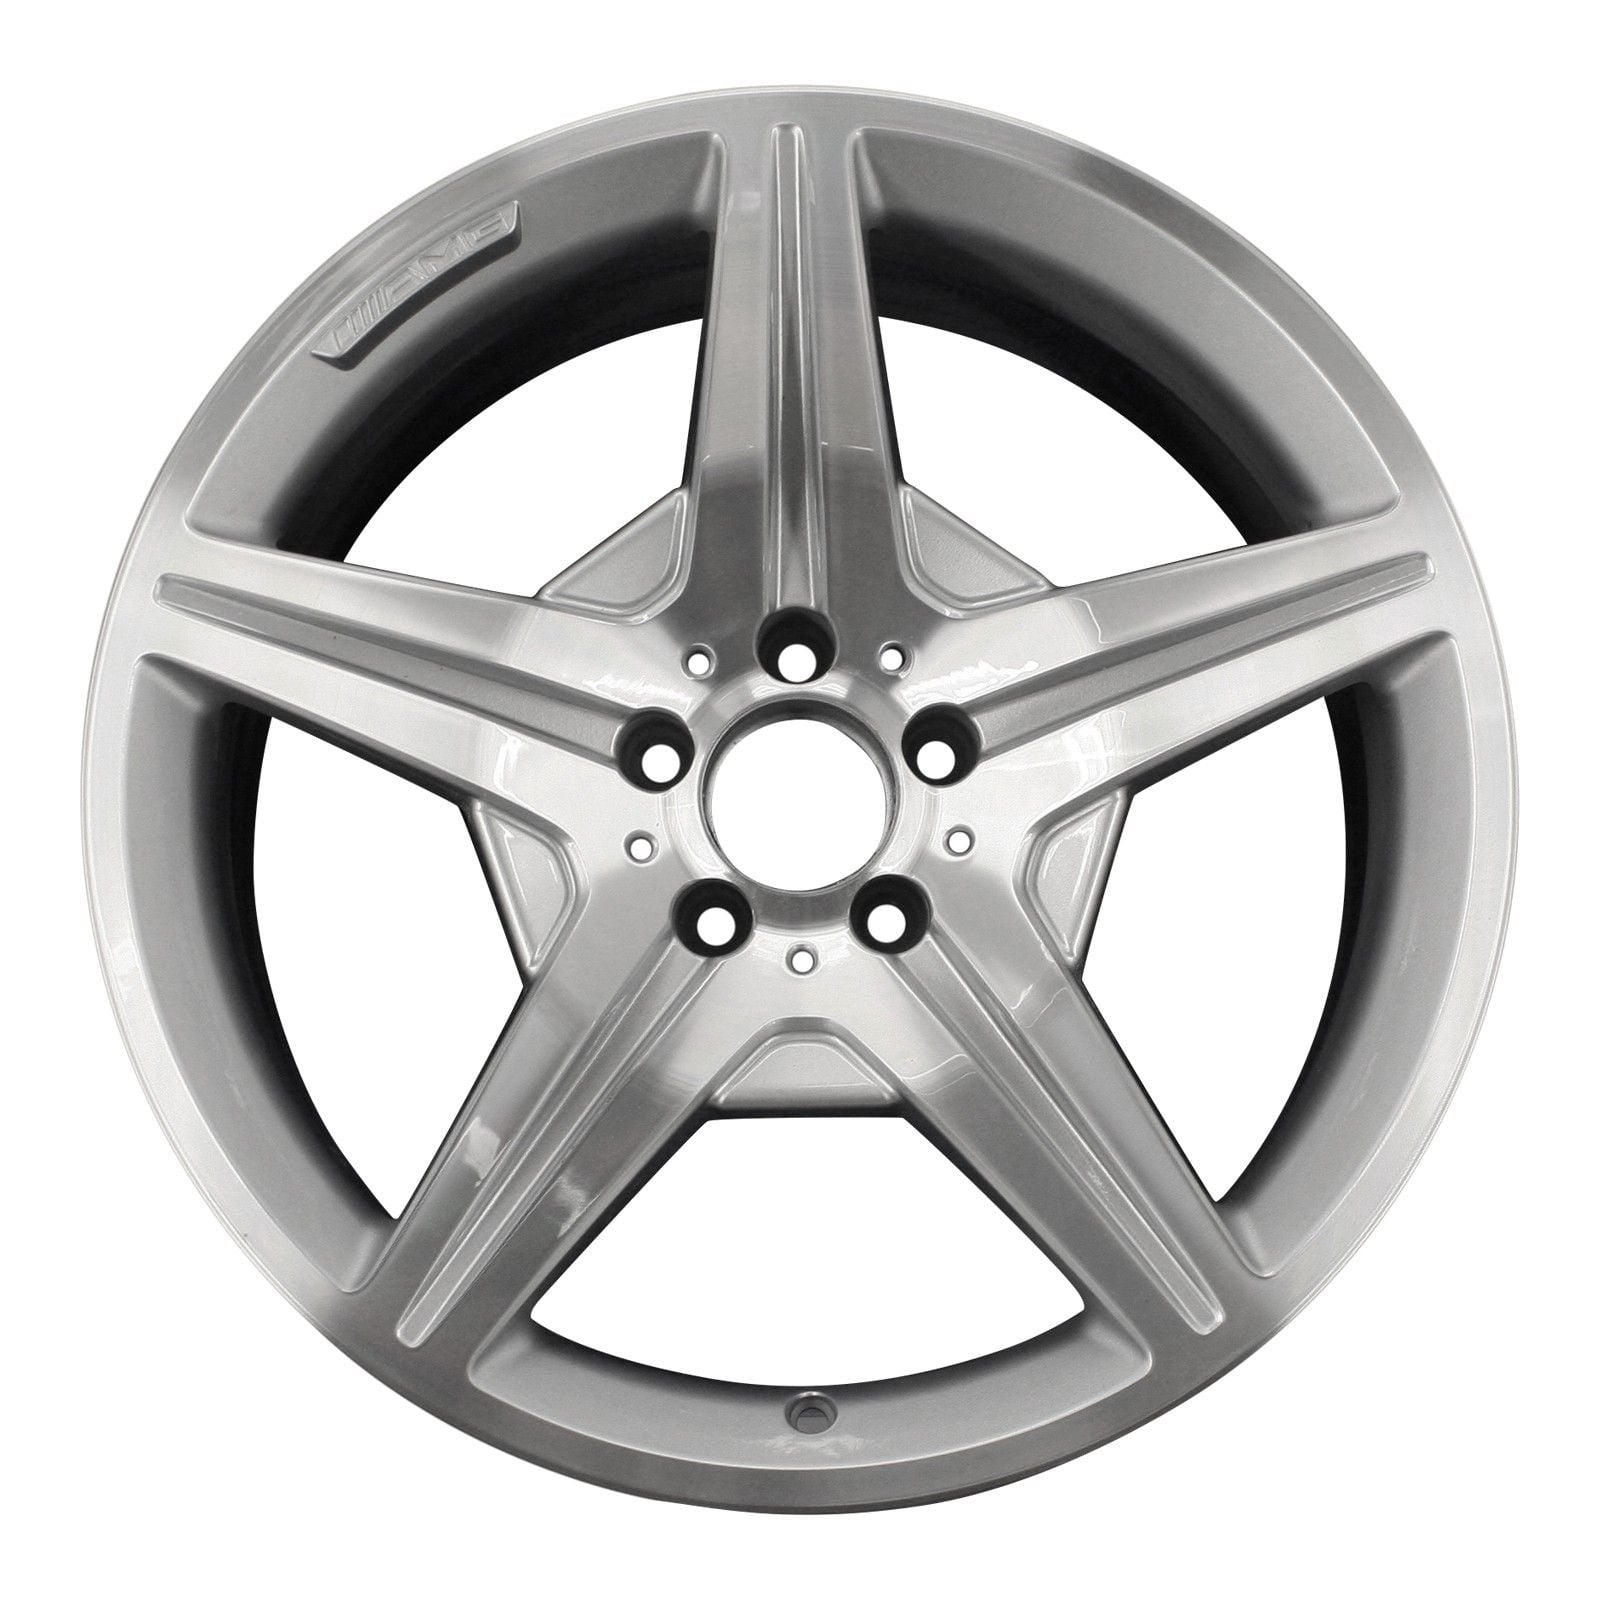 Wheels and Tires/Axles - WTB: 19" AMG 5-Spoke Wheels as pictured - Staggered set of 4 - Used - 2009 to 2012 Mercedes-Benz SL550 - Plano/dallas, TX 75024, United States